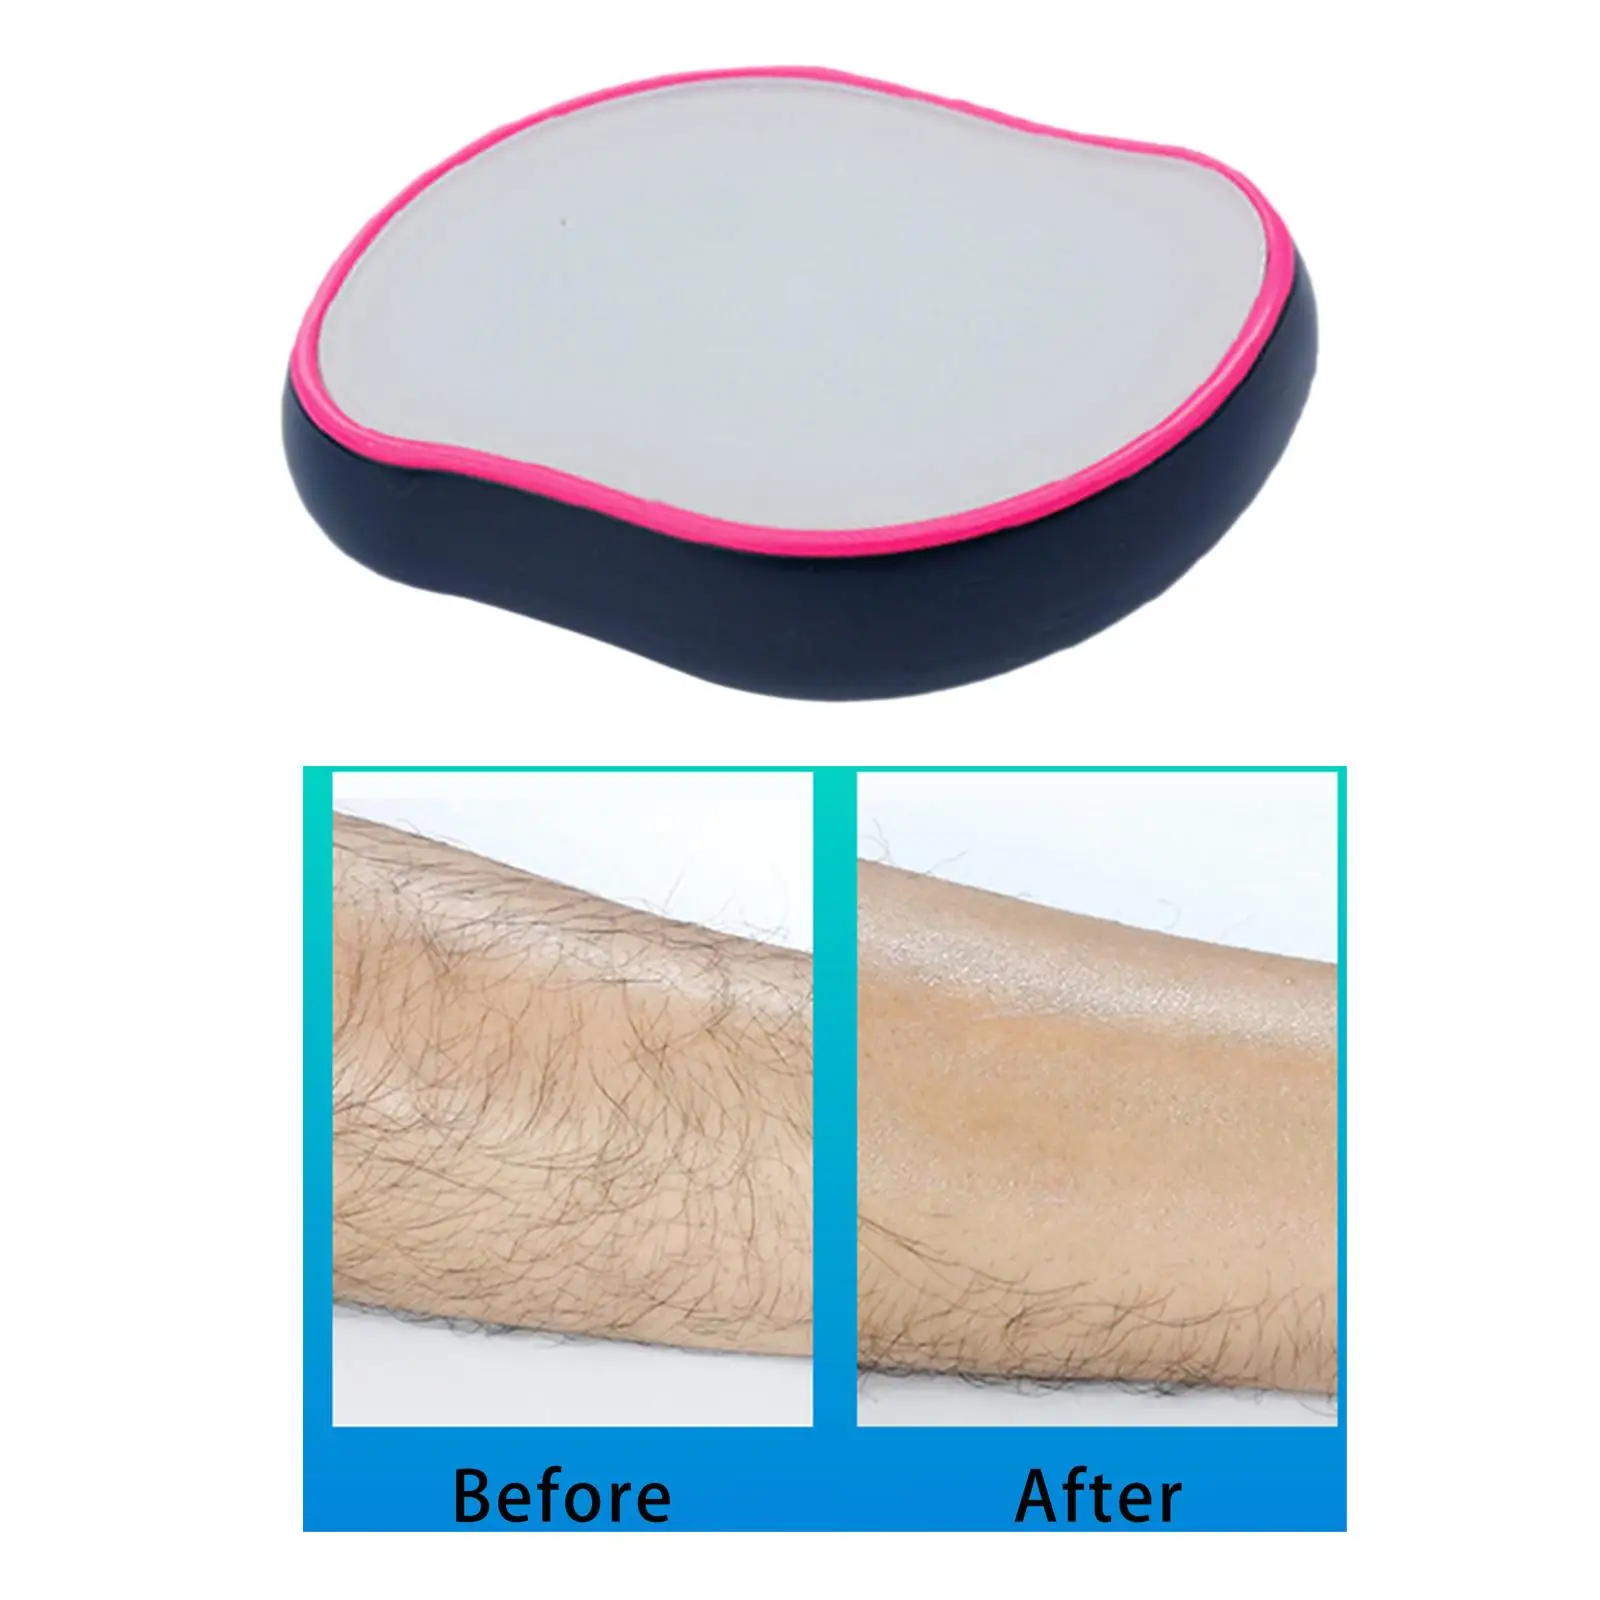 Women  Remover Eraser, for Legs, Easy to Use Reusable Sustainable Epilation Exfoliating Tool Depilator  Efficient